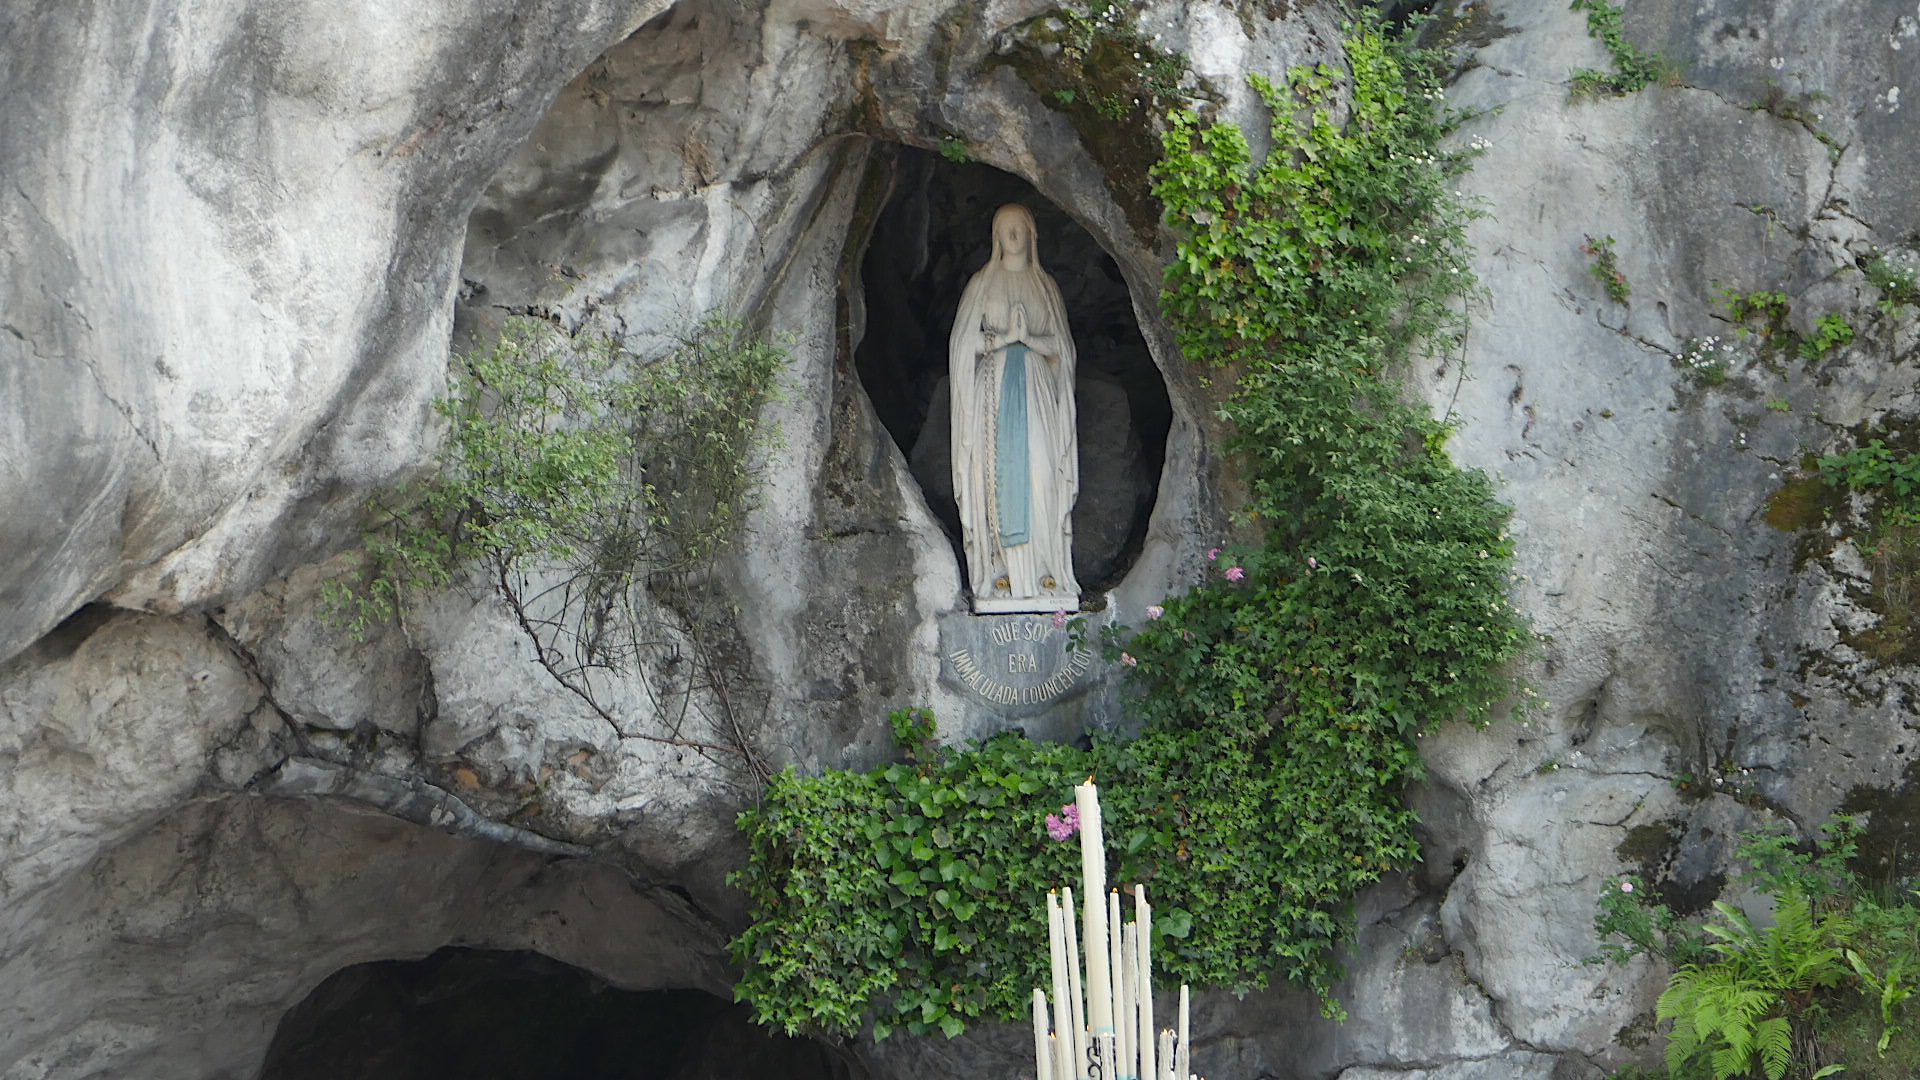 Statue of the Virgin Mary at the spot where Bernadette saw her.